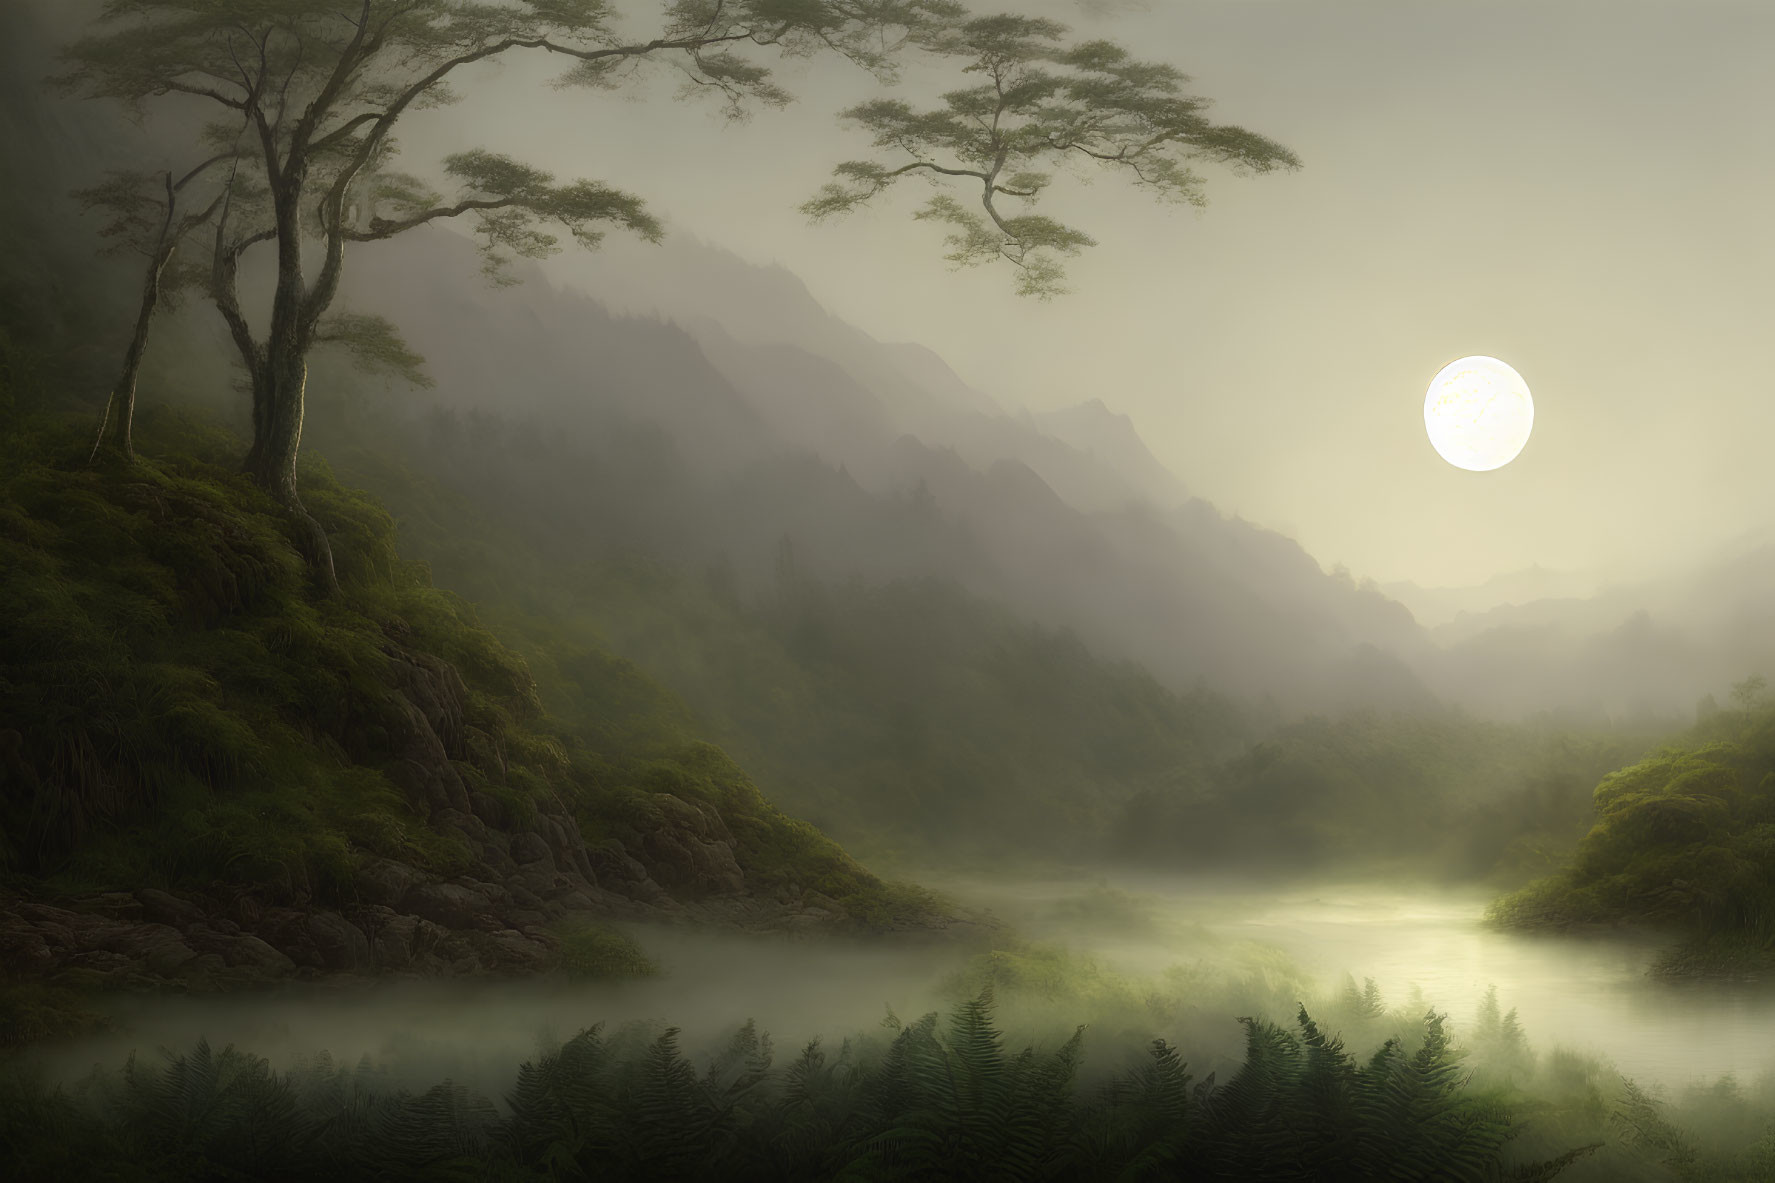 Tranquil landscape: full moon over misty hills, river, ferns, lone tree